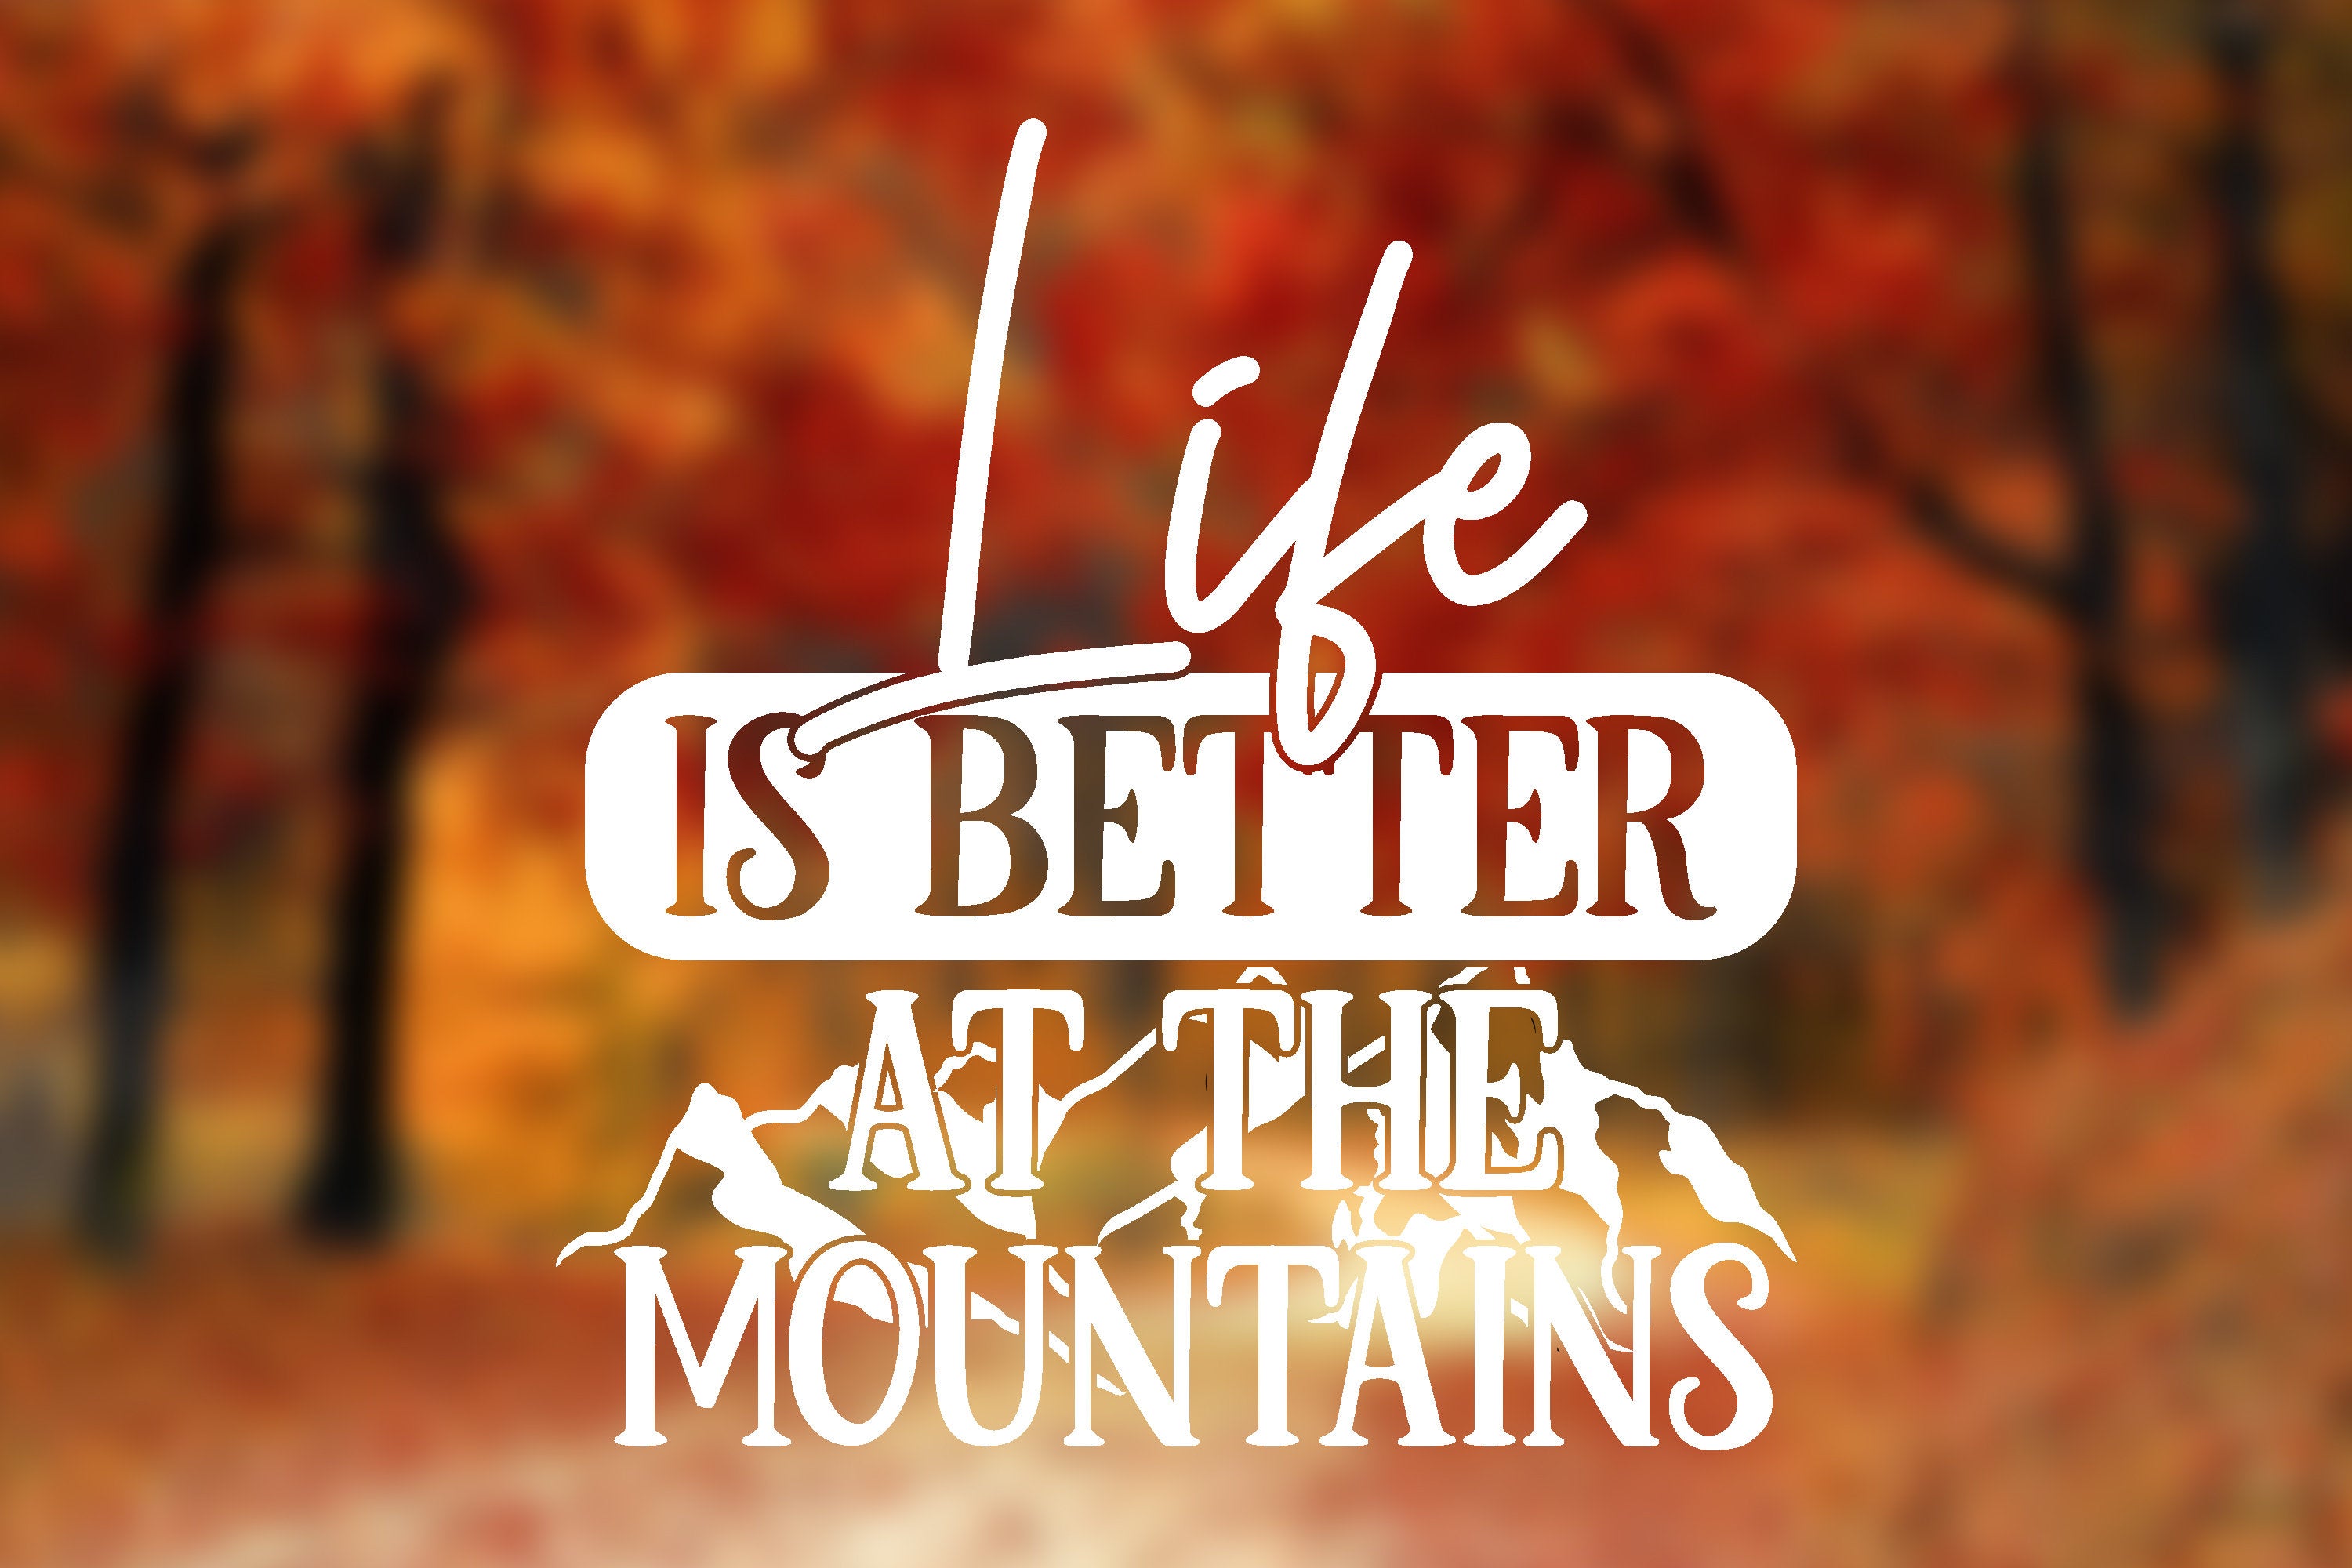 Car Vinyl Decal - Life is Better at the Mountains - Permanent Outdoor-Grade Vinyl Sticker for Vehicles, RV, Camper, Boat